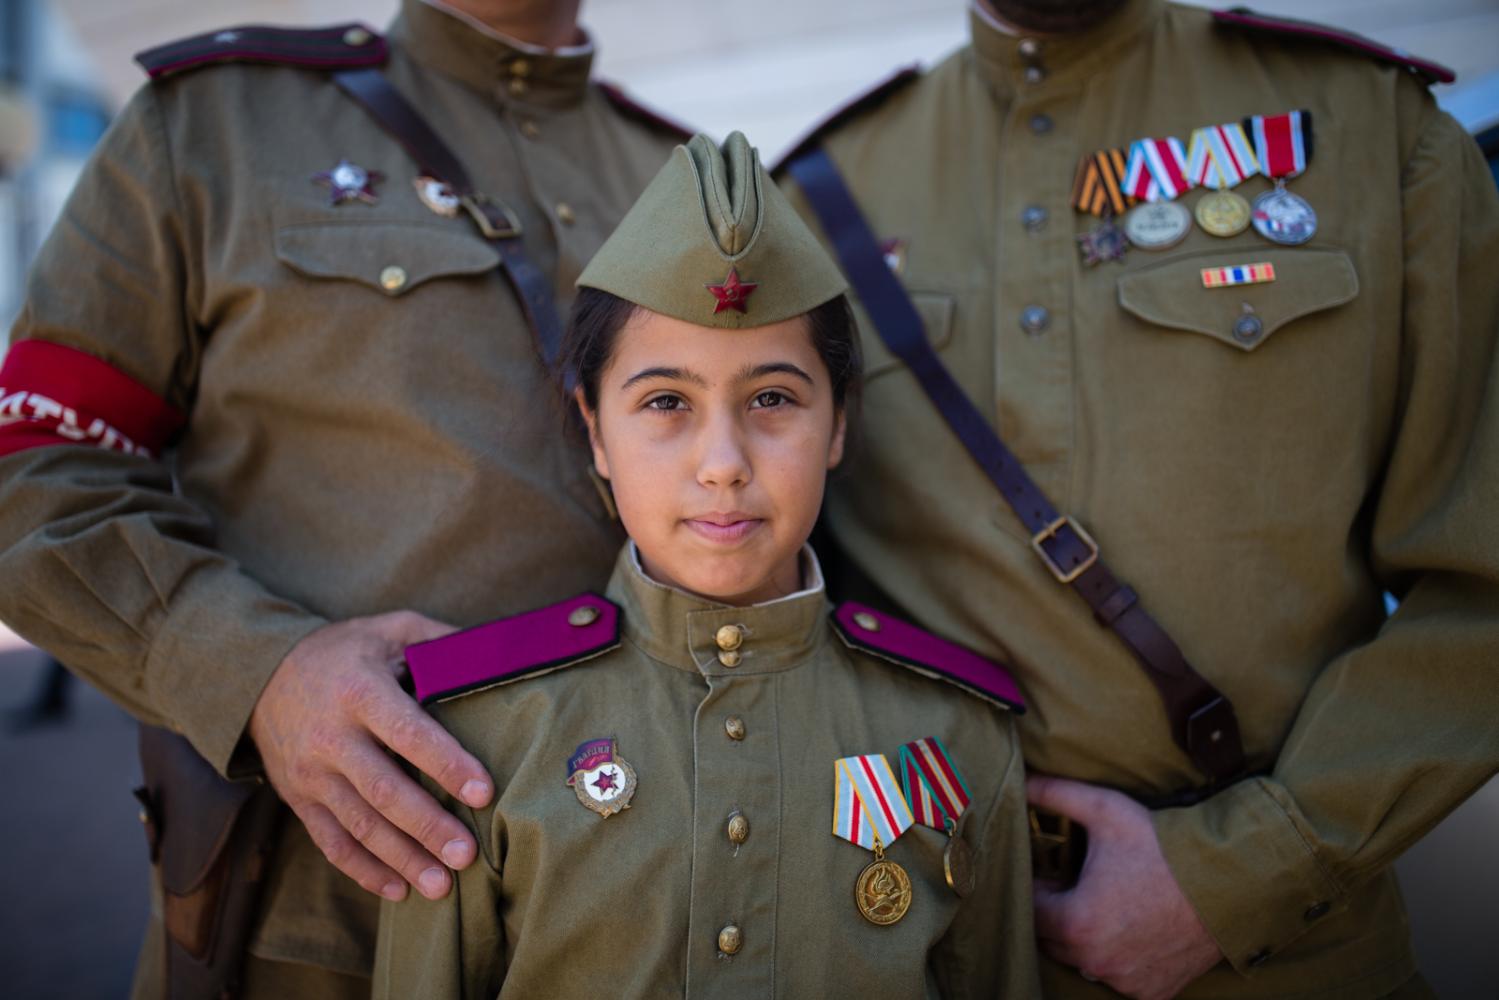 PORTRAITS  - ASHDOD, ISRAEL - MAY 07, 2016: A girl wearing a Red Army...